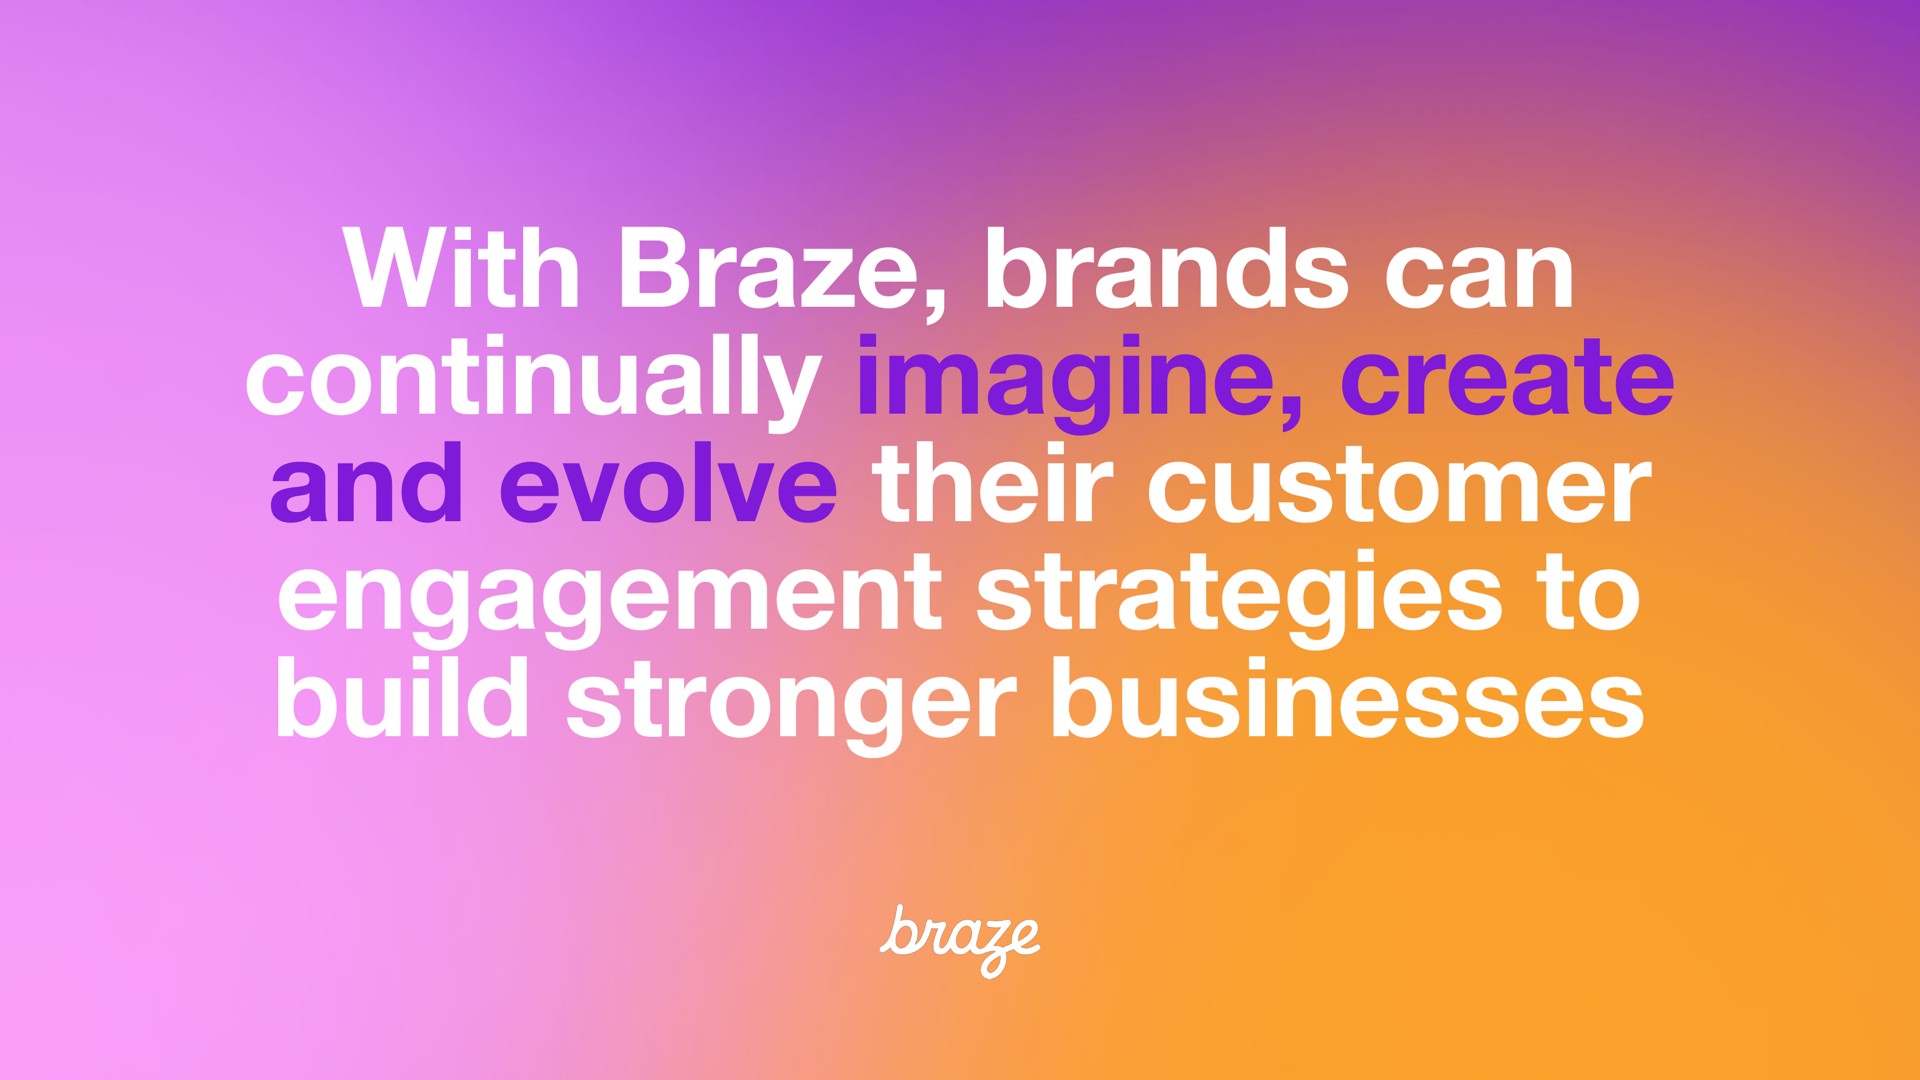 with braze brands can continually imagine create and evolve their customer engagement strategies to build businesses | Braze